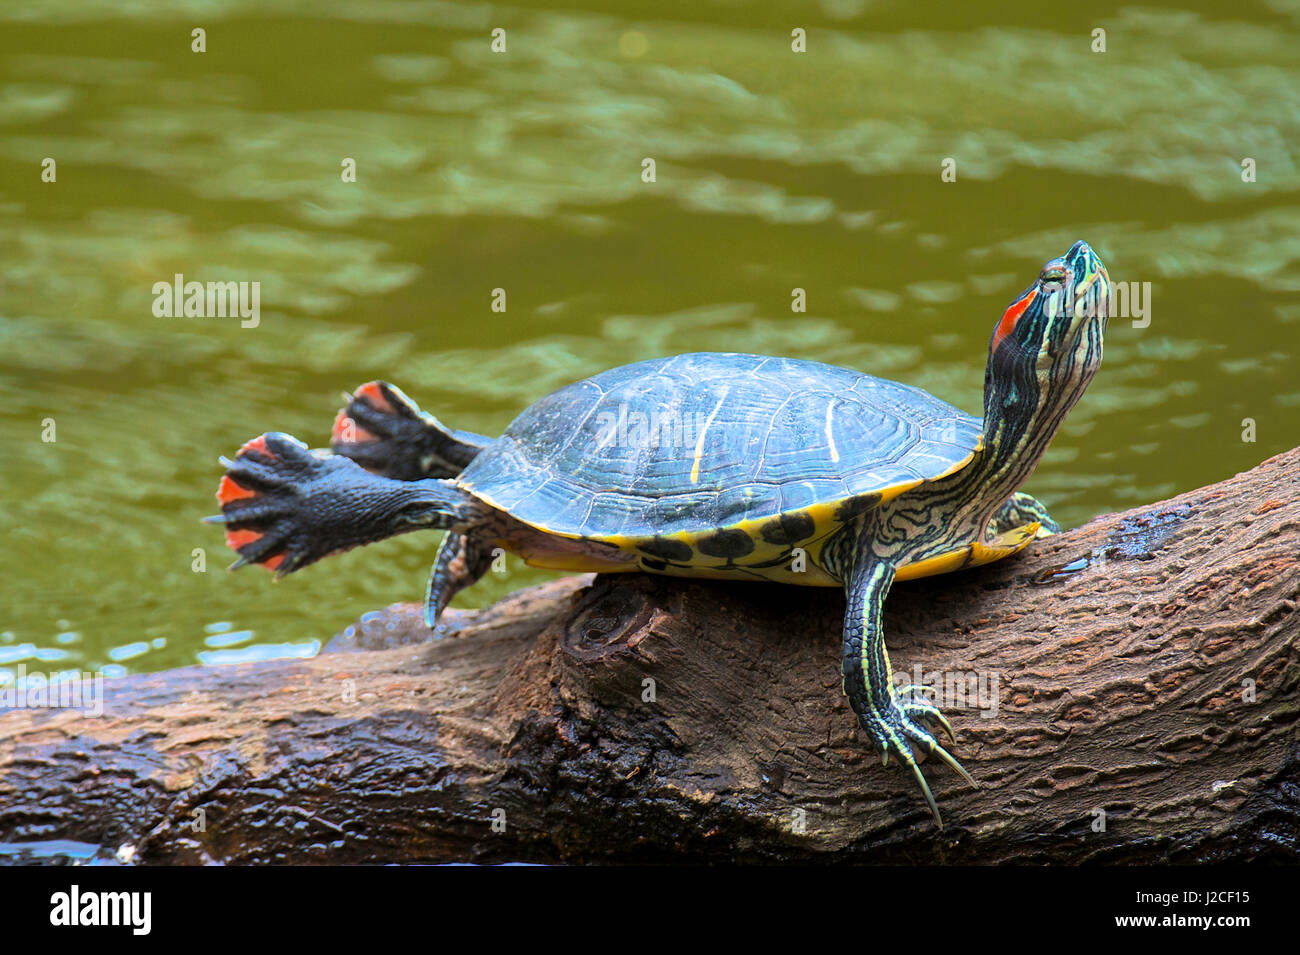 Hong Kong, A painted turtle stretches on a log. Stock Photo